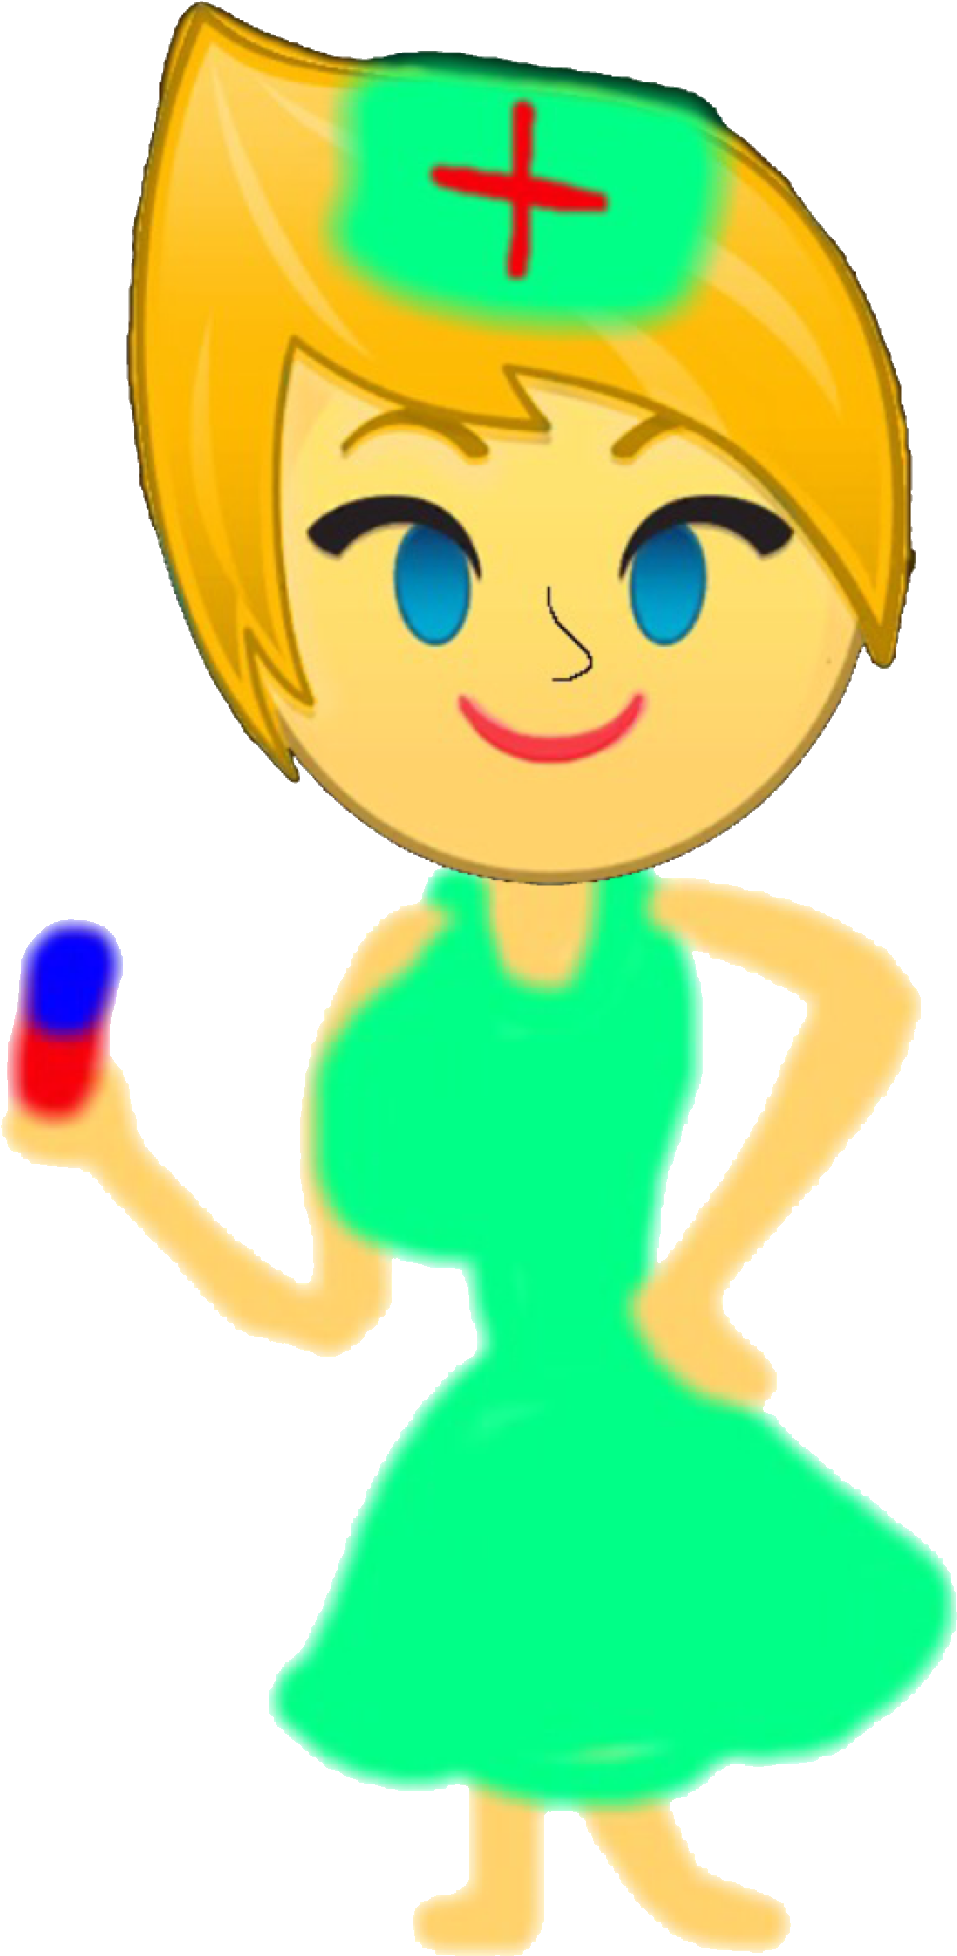 A Cartoon Of A Woman Holding A Blue And Red Object